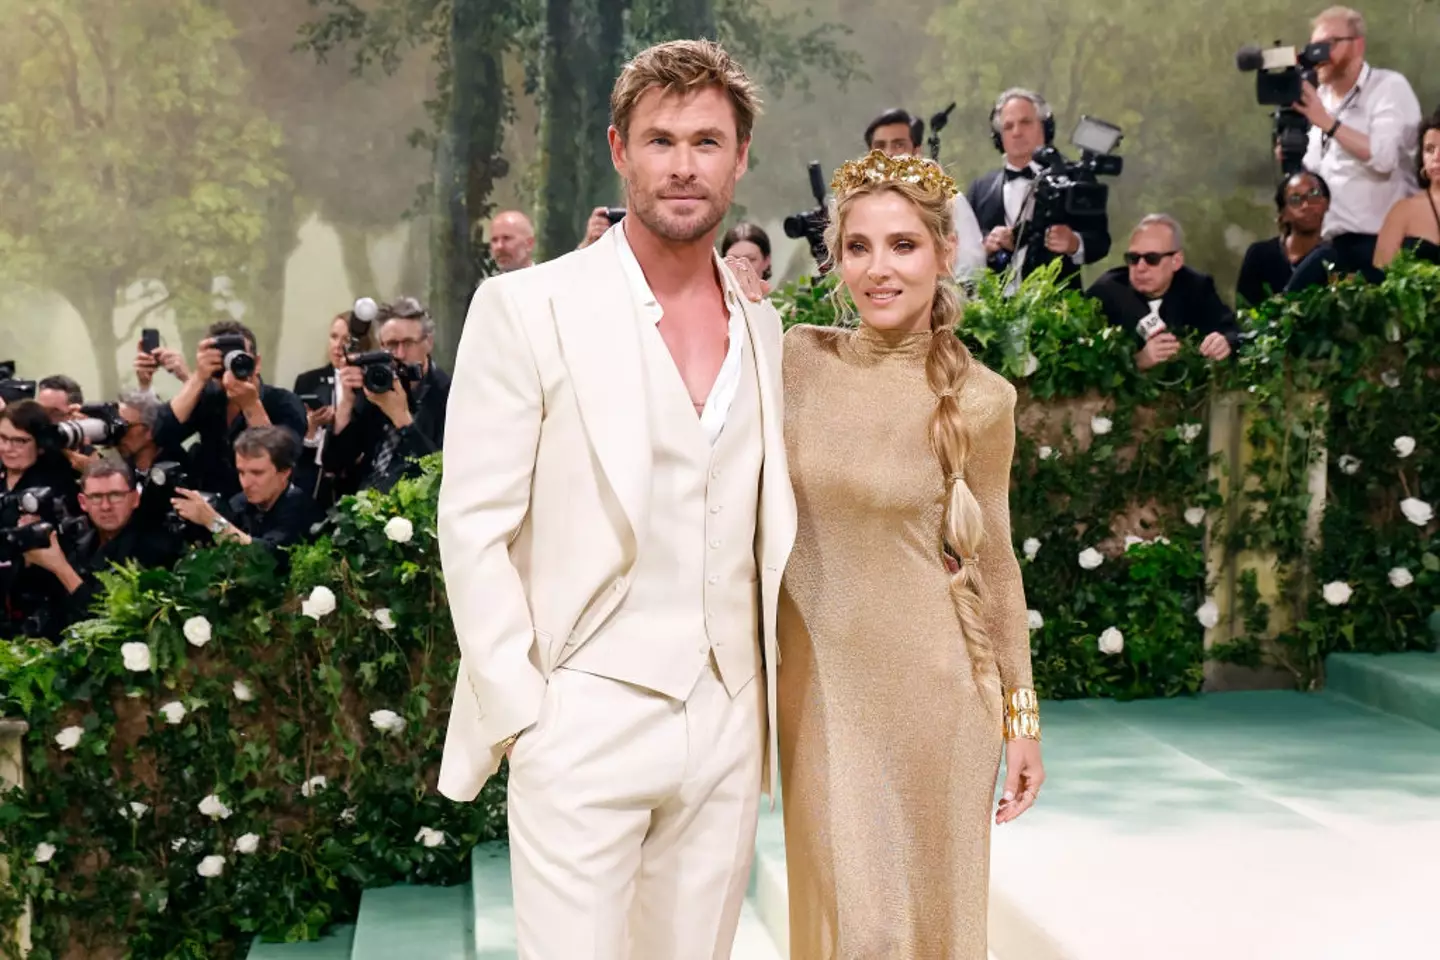 The Thor star attended the fashion event with his wife, Elsa Pataky. (Taylor Hill / Contributor / Getty Images)